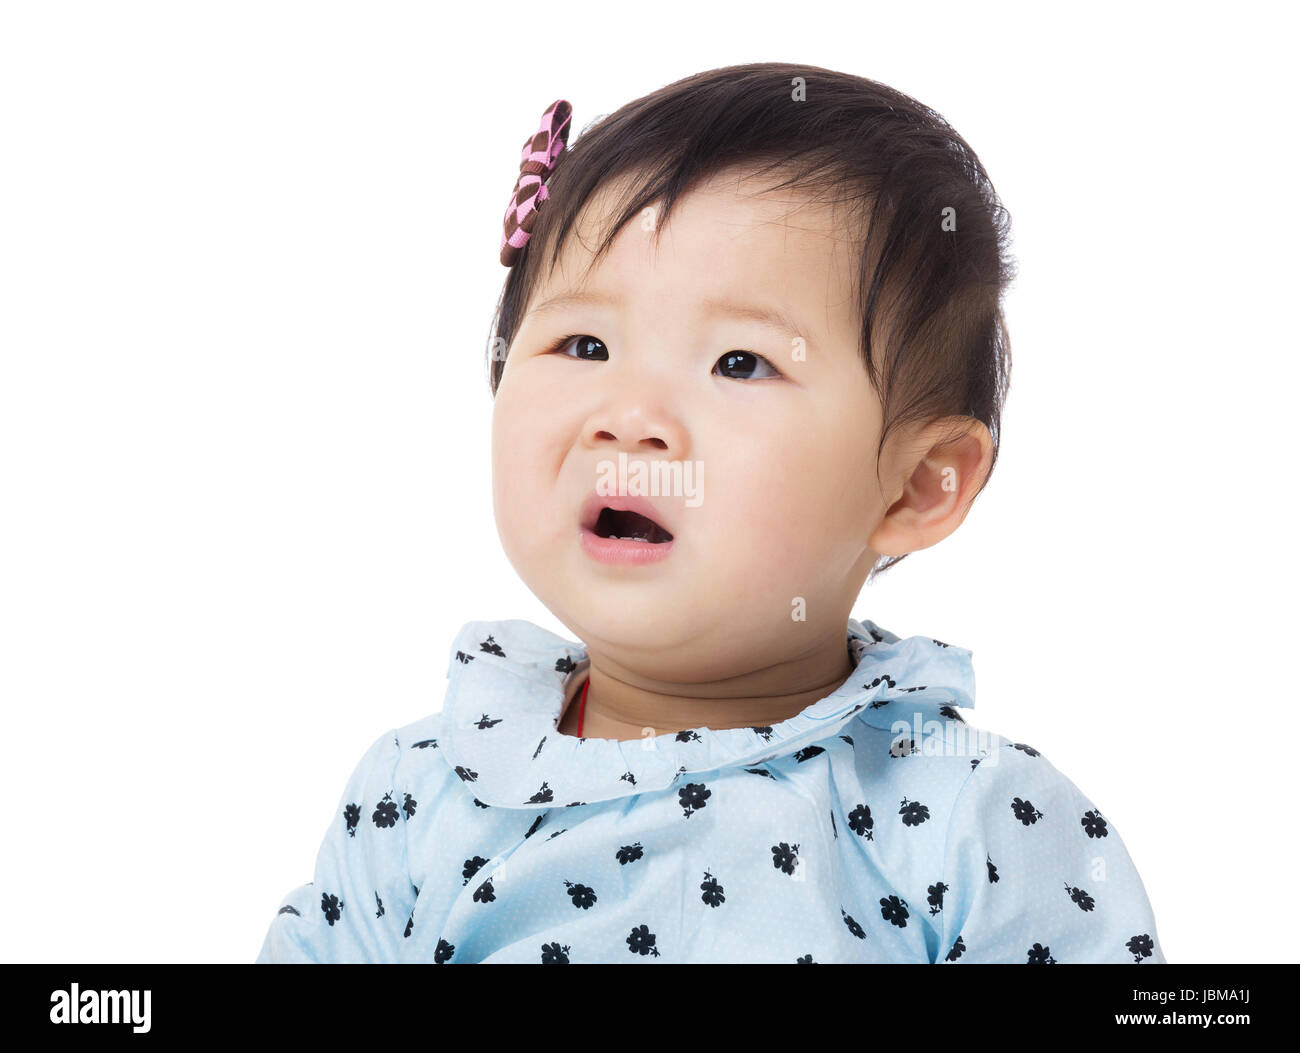 Baby Making Funny Surprised Face Stock Photo Alamy